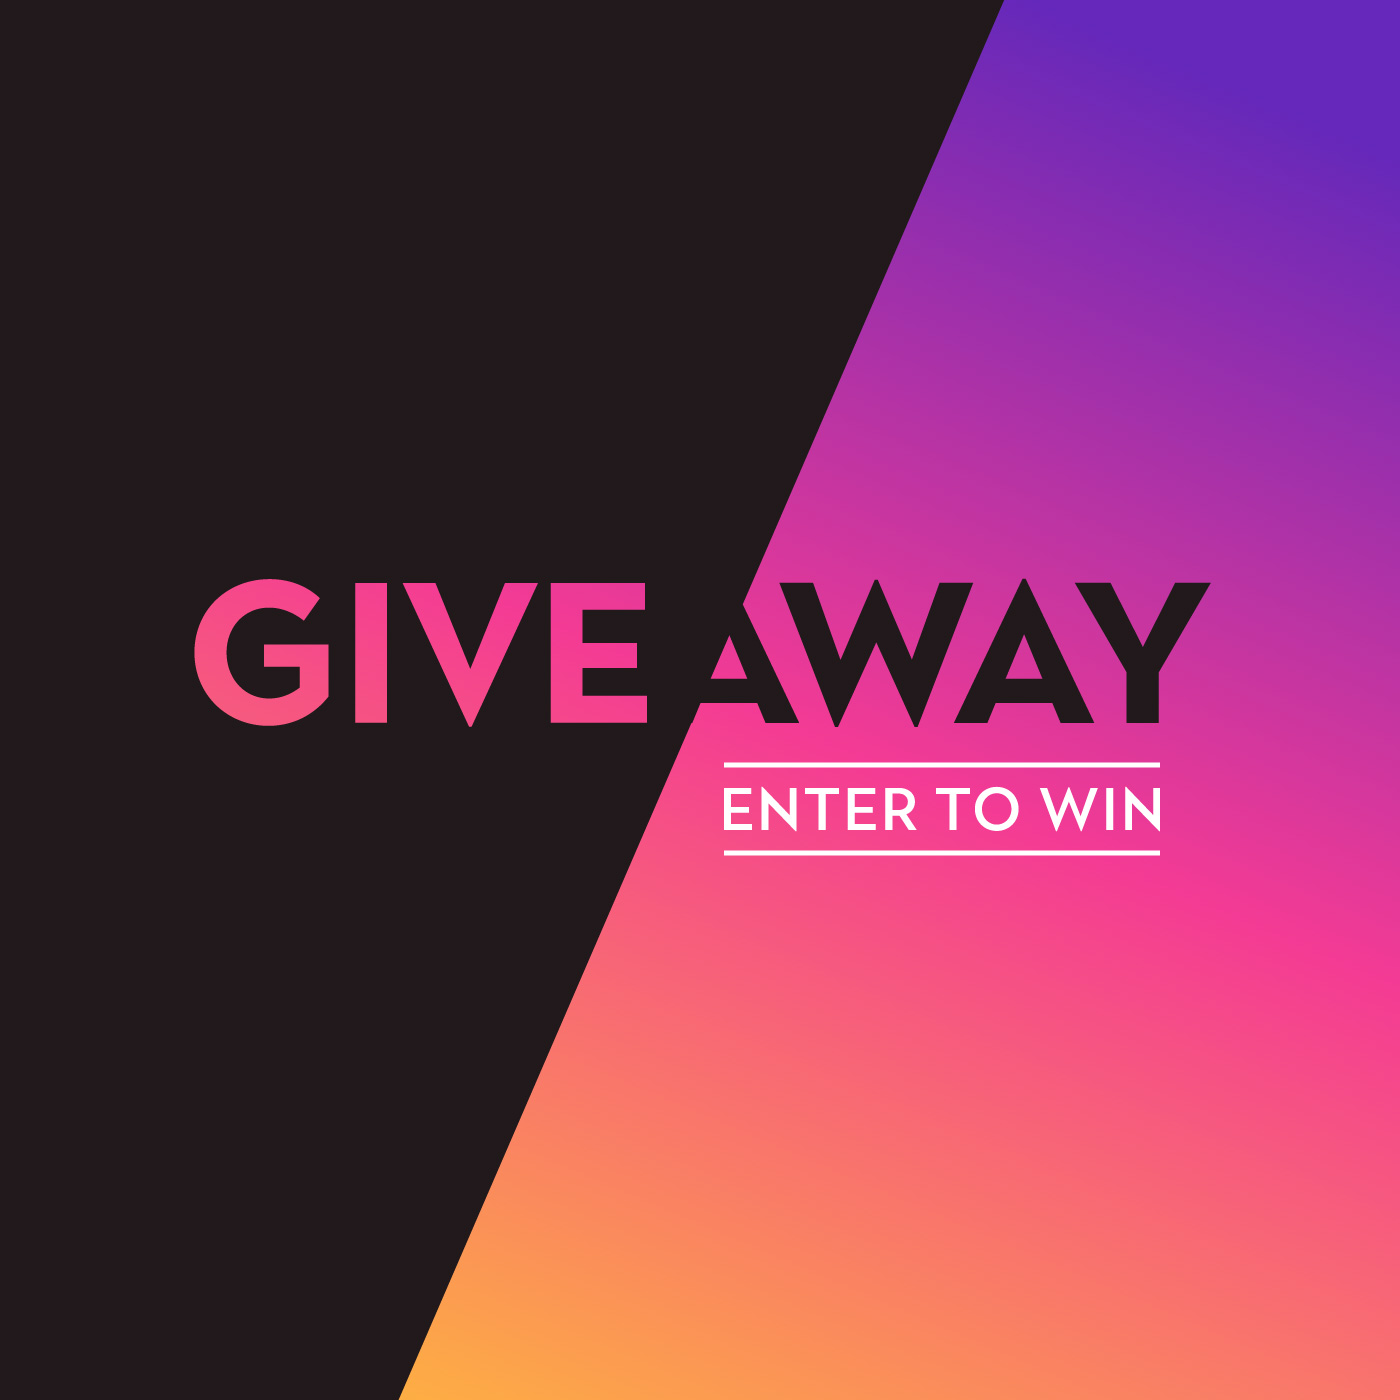 giveaway-enter-to-win-card-template-829967-vector-art-at-vecteezy